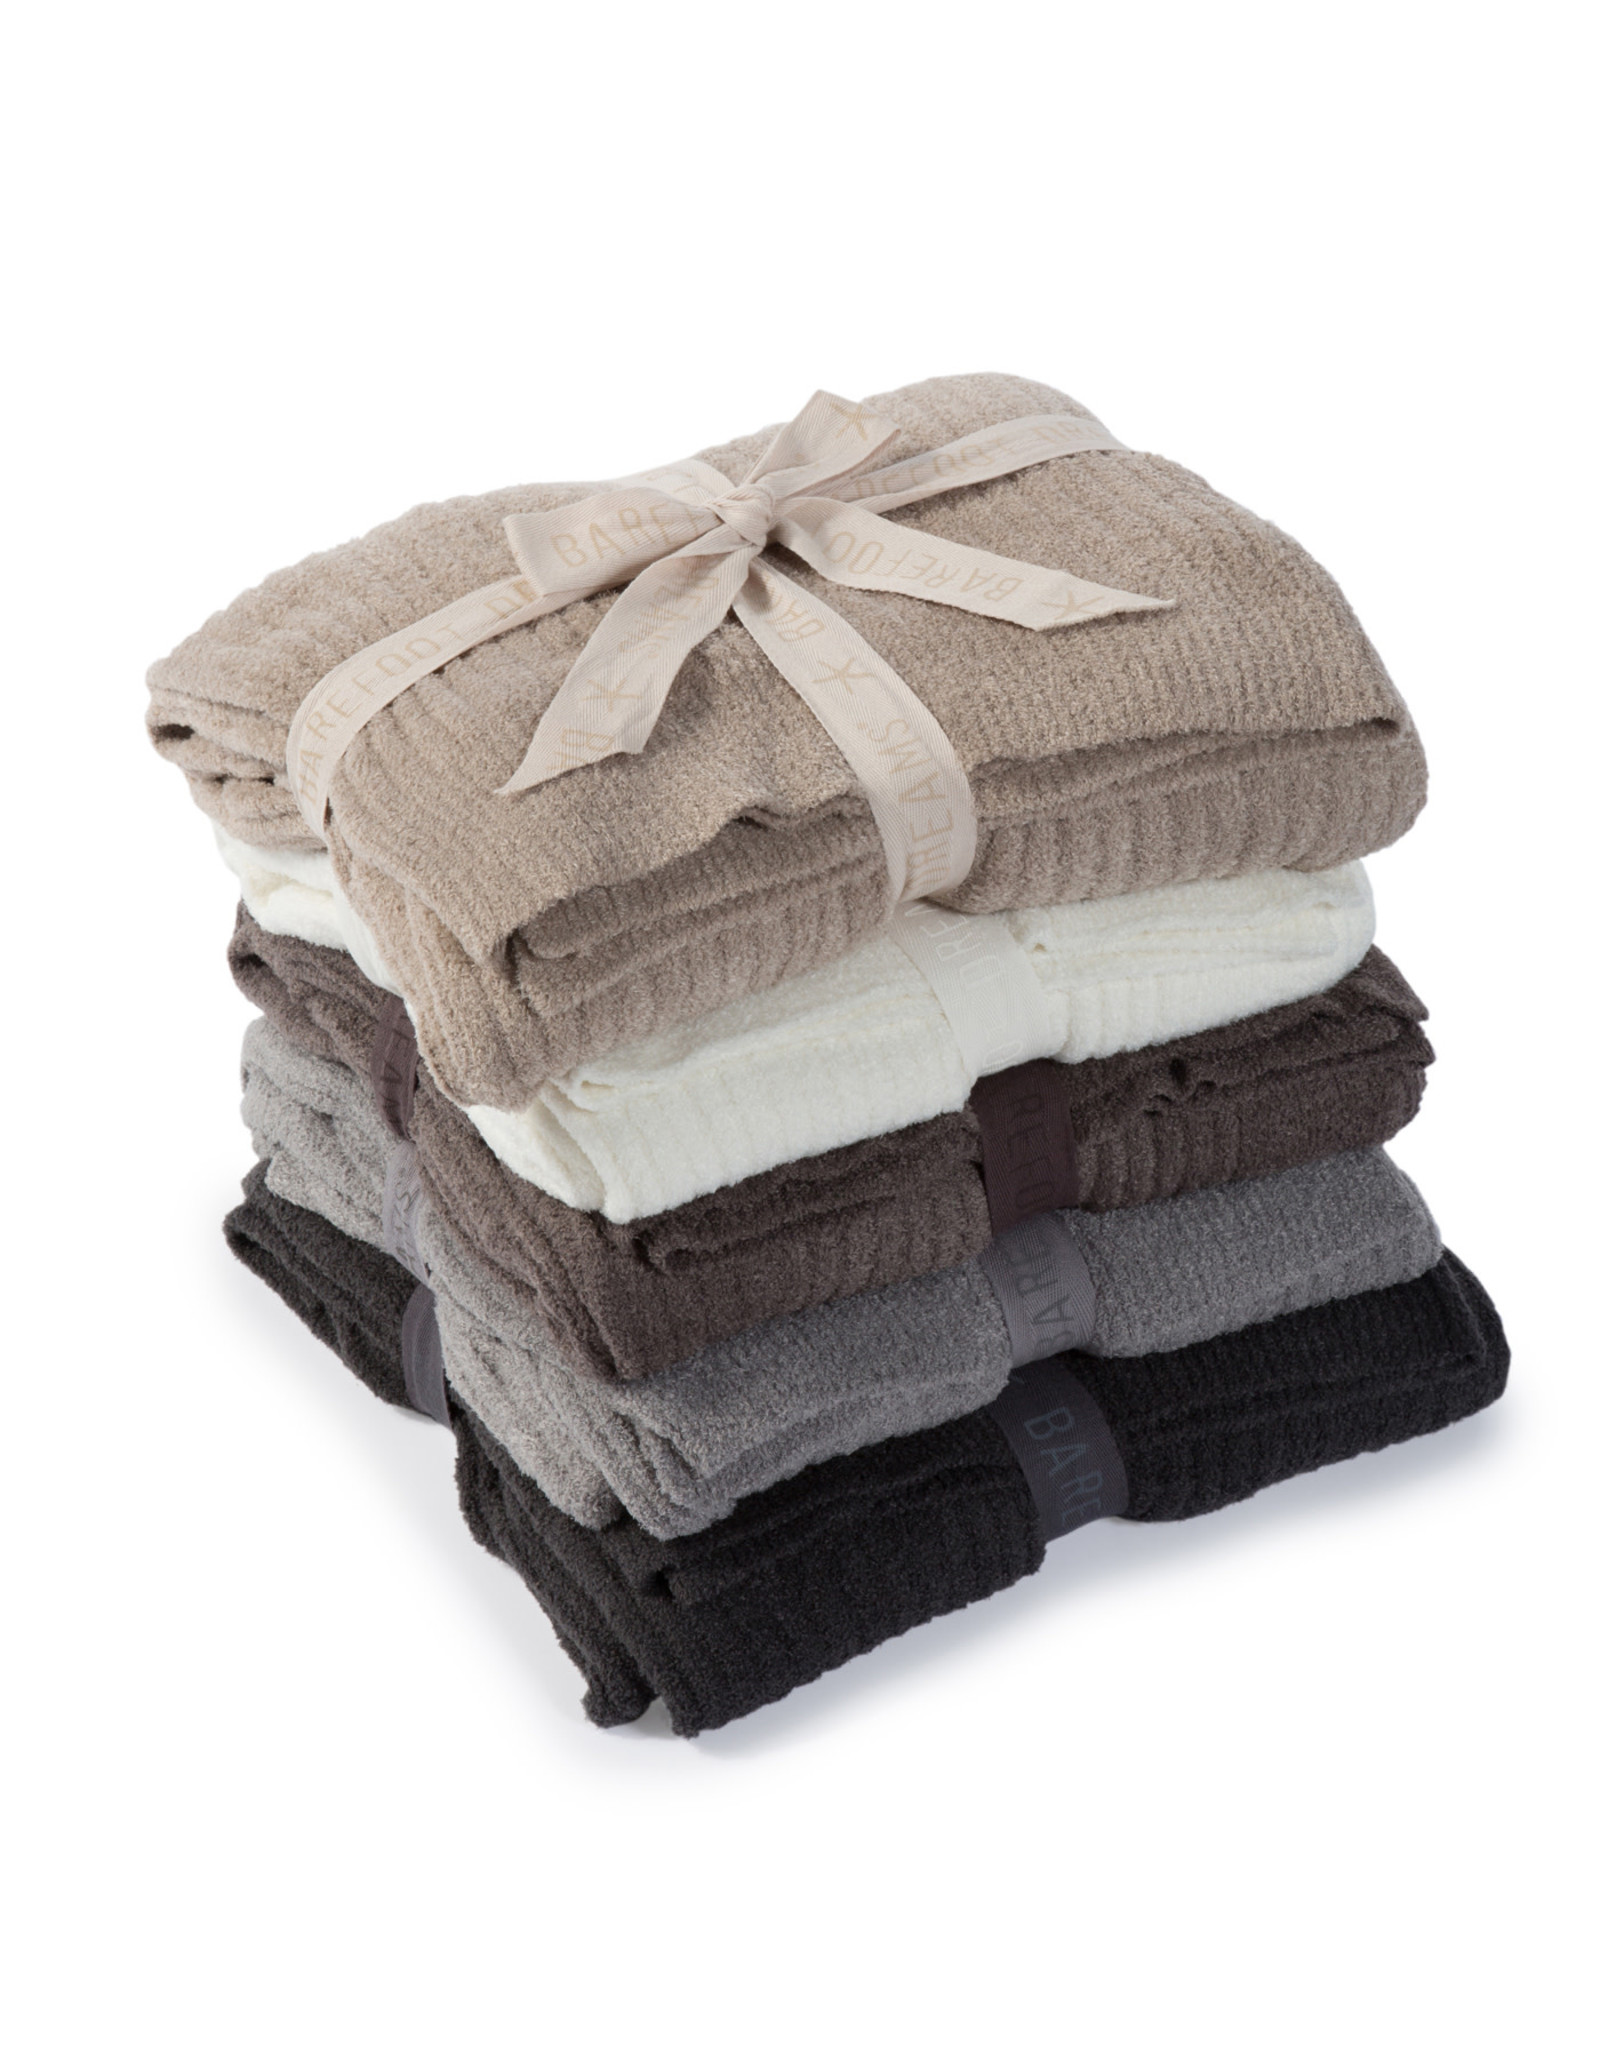 Barefoot Dreams Flash Deal: Get a $120 CozyChic Blanket for Just $30